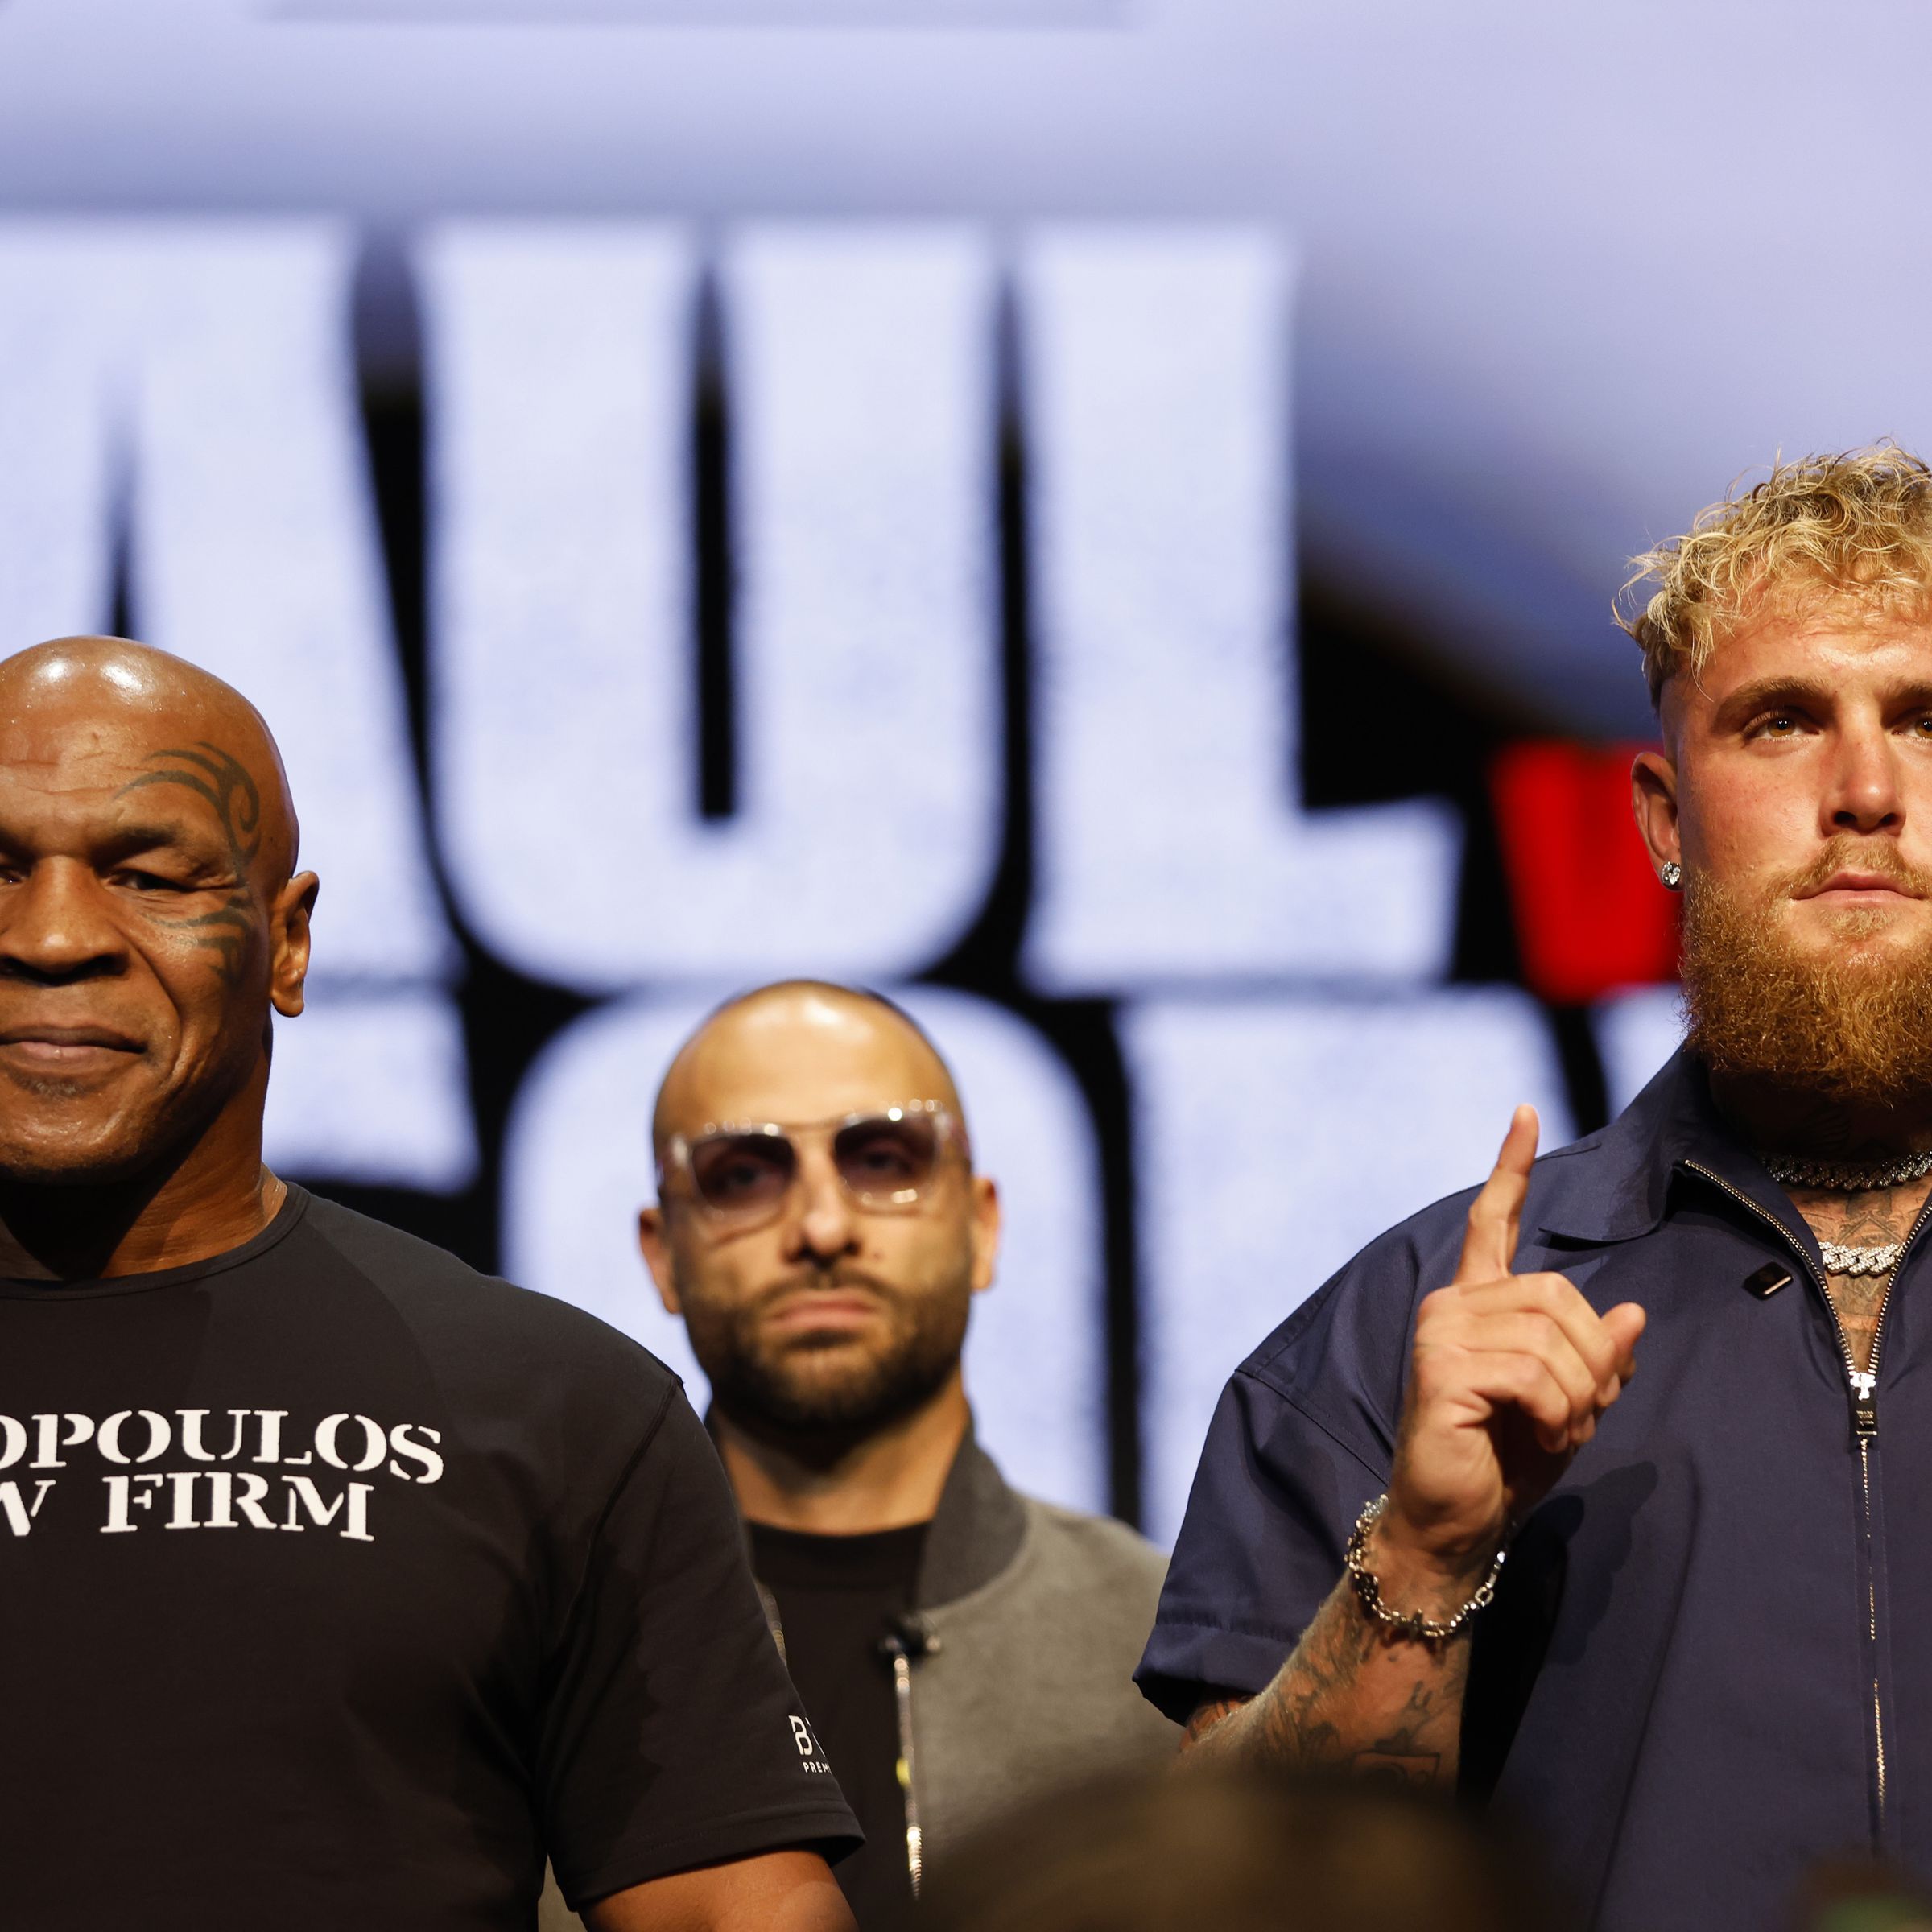 A photo showing Jake Paul and Mike Tyson at a press conference